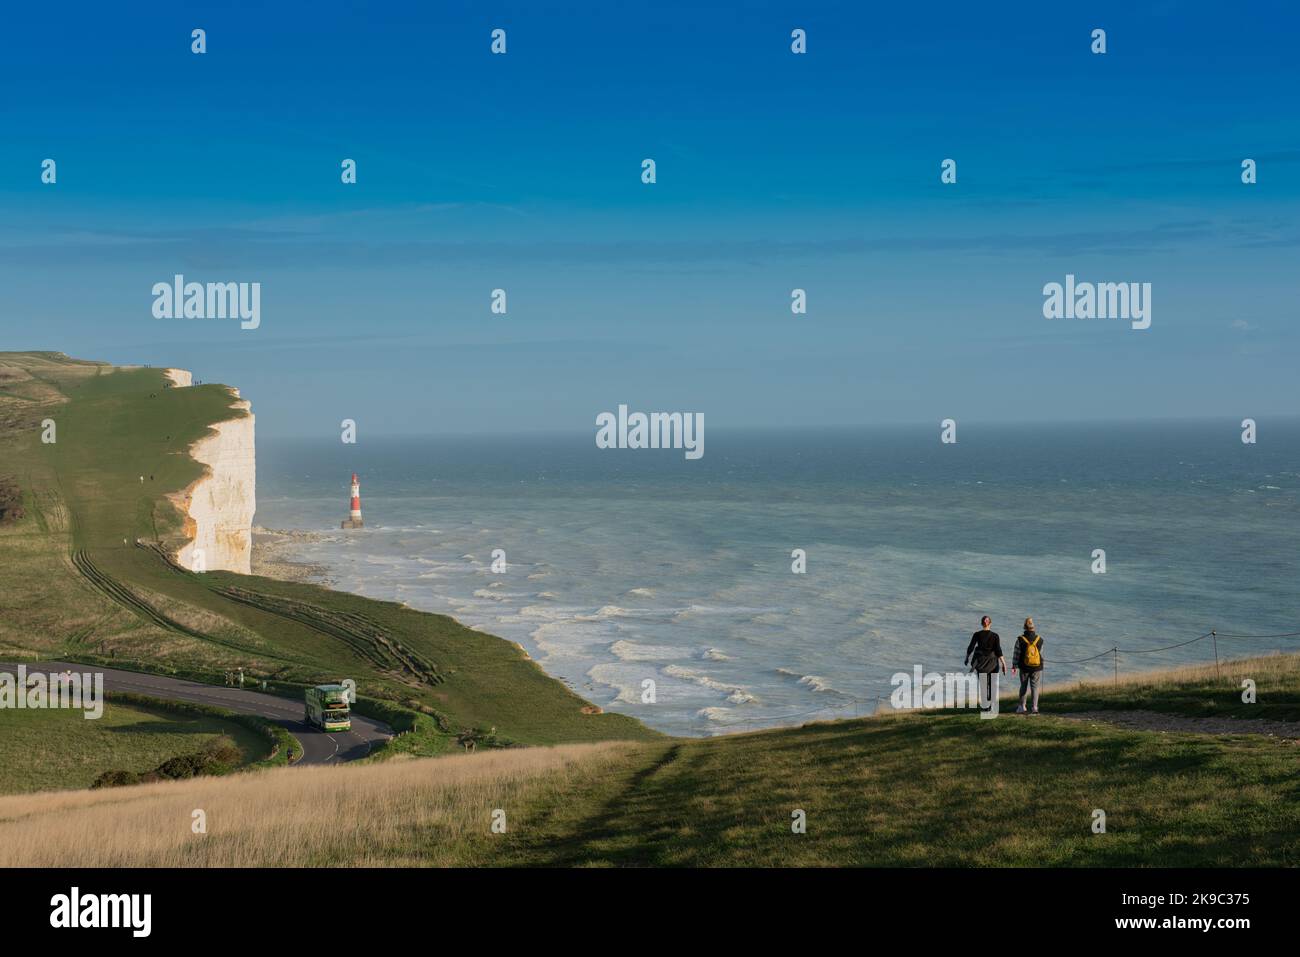 The hills and coast near Beachy Head in East Sussex, England, UK. Stock Photo